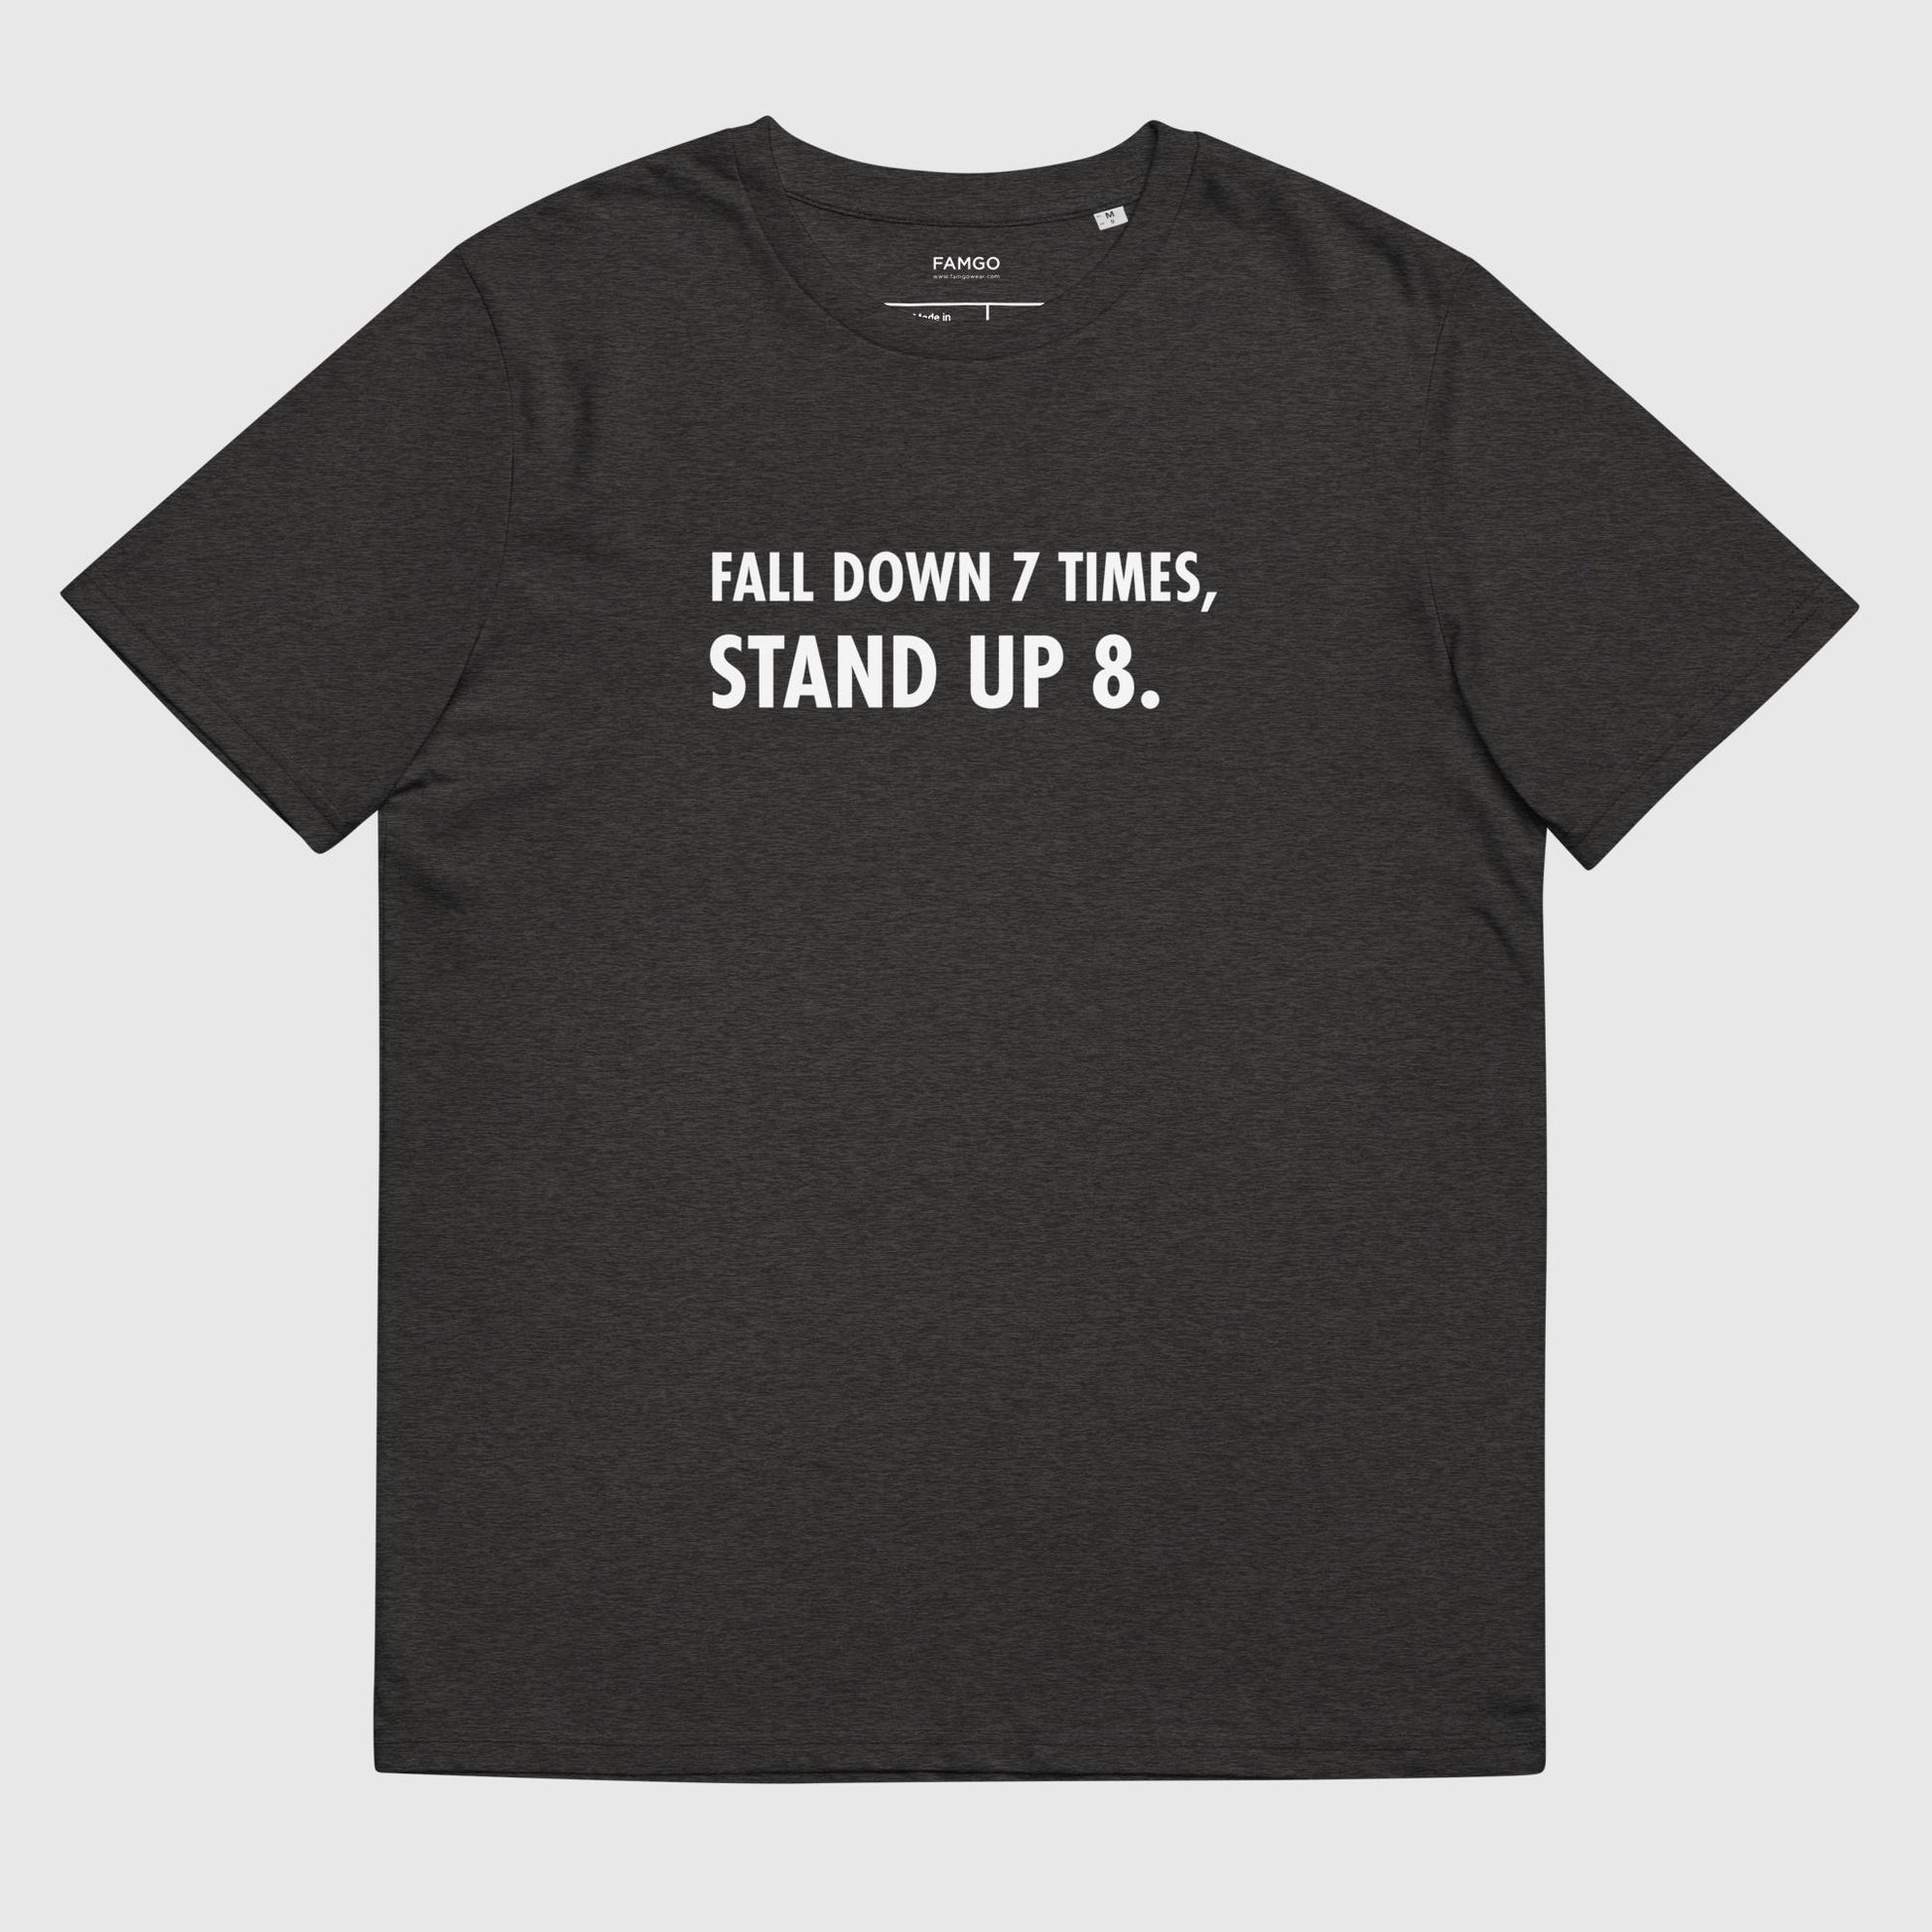 Men's dark gray organic cotton t-shirt that features the Japanese proverb "Fall Down 7 Times, Stand Up 8."